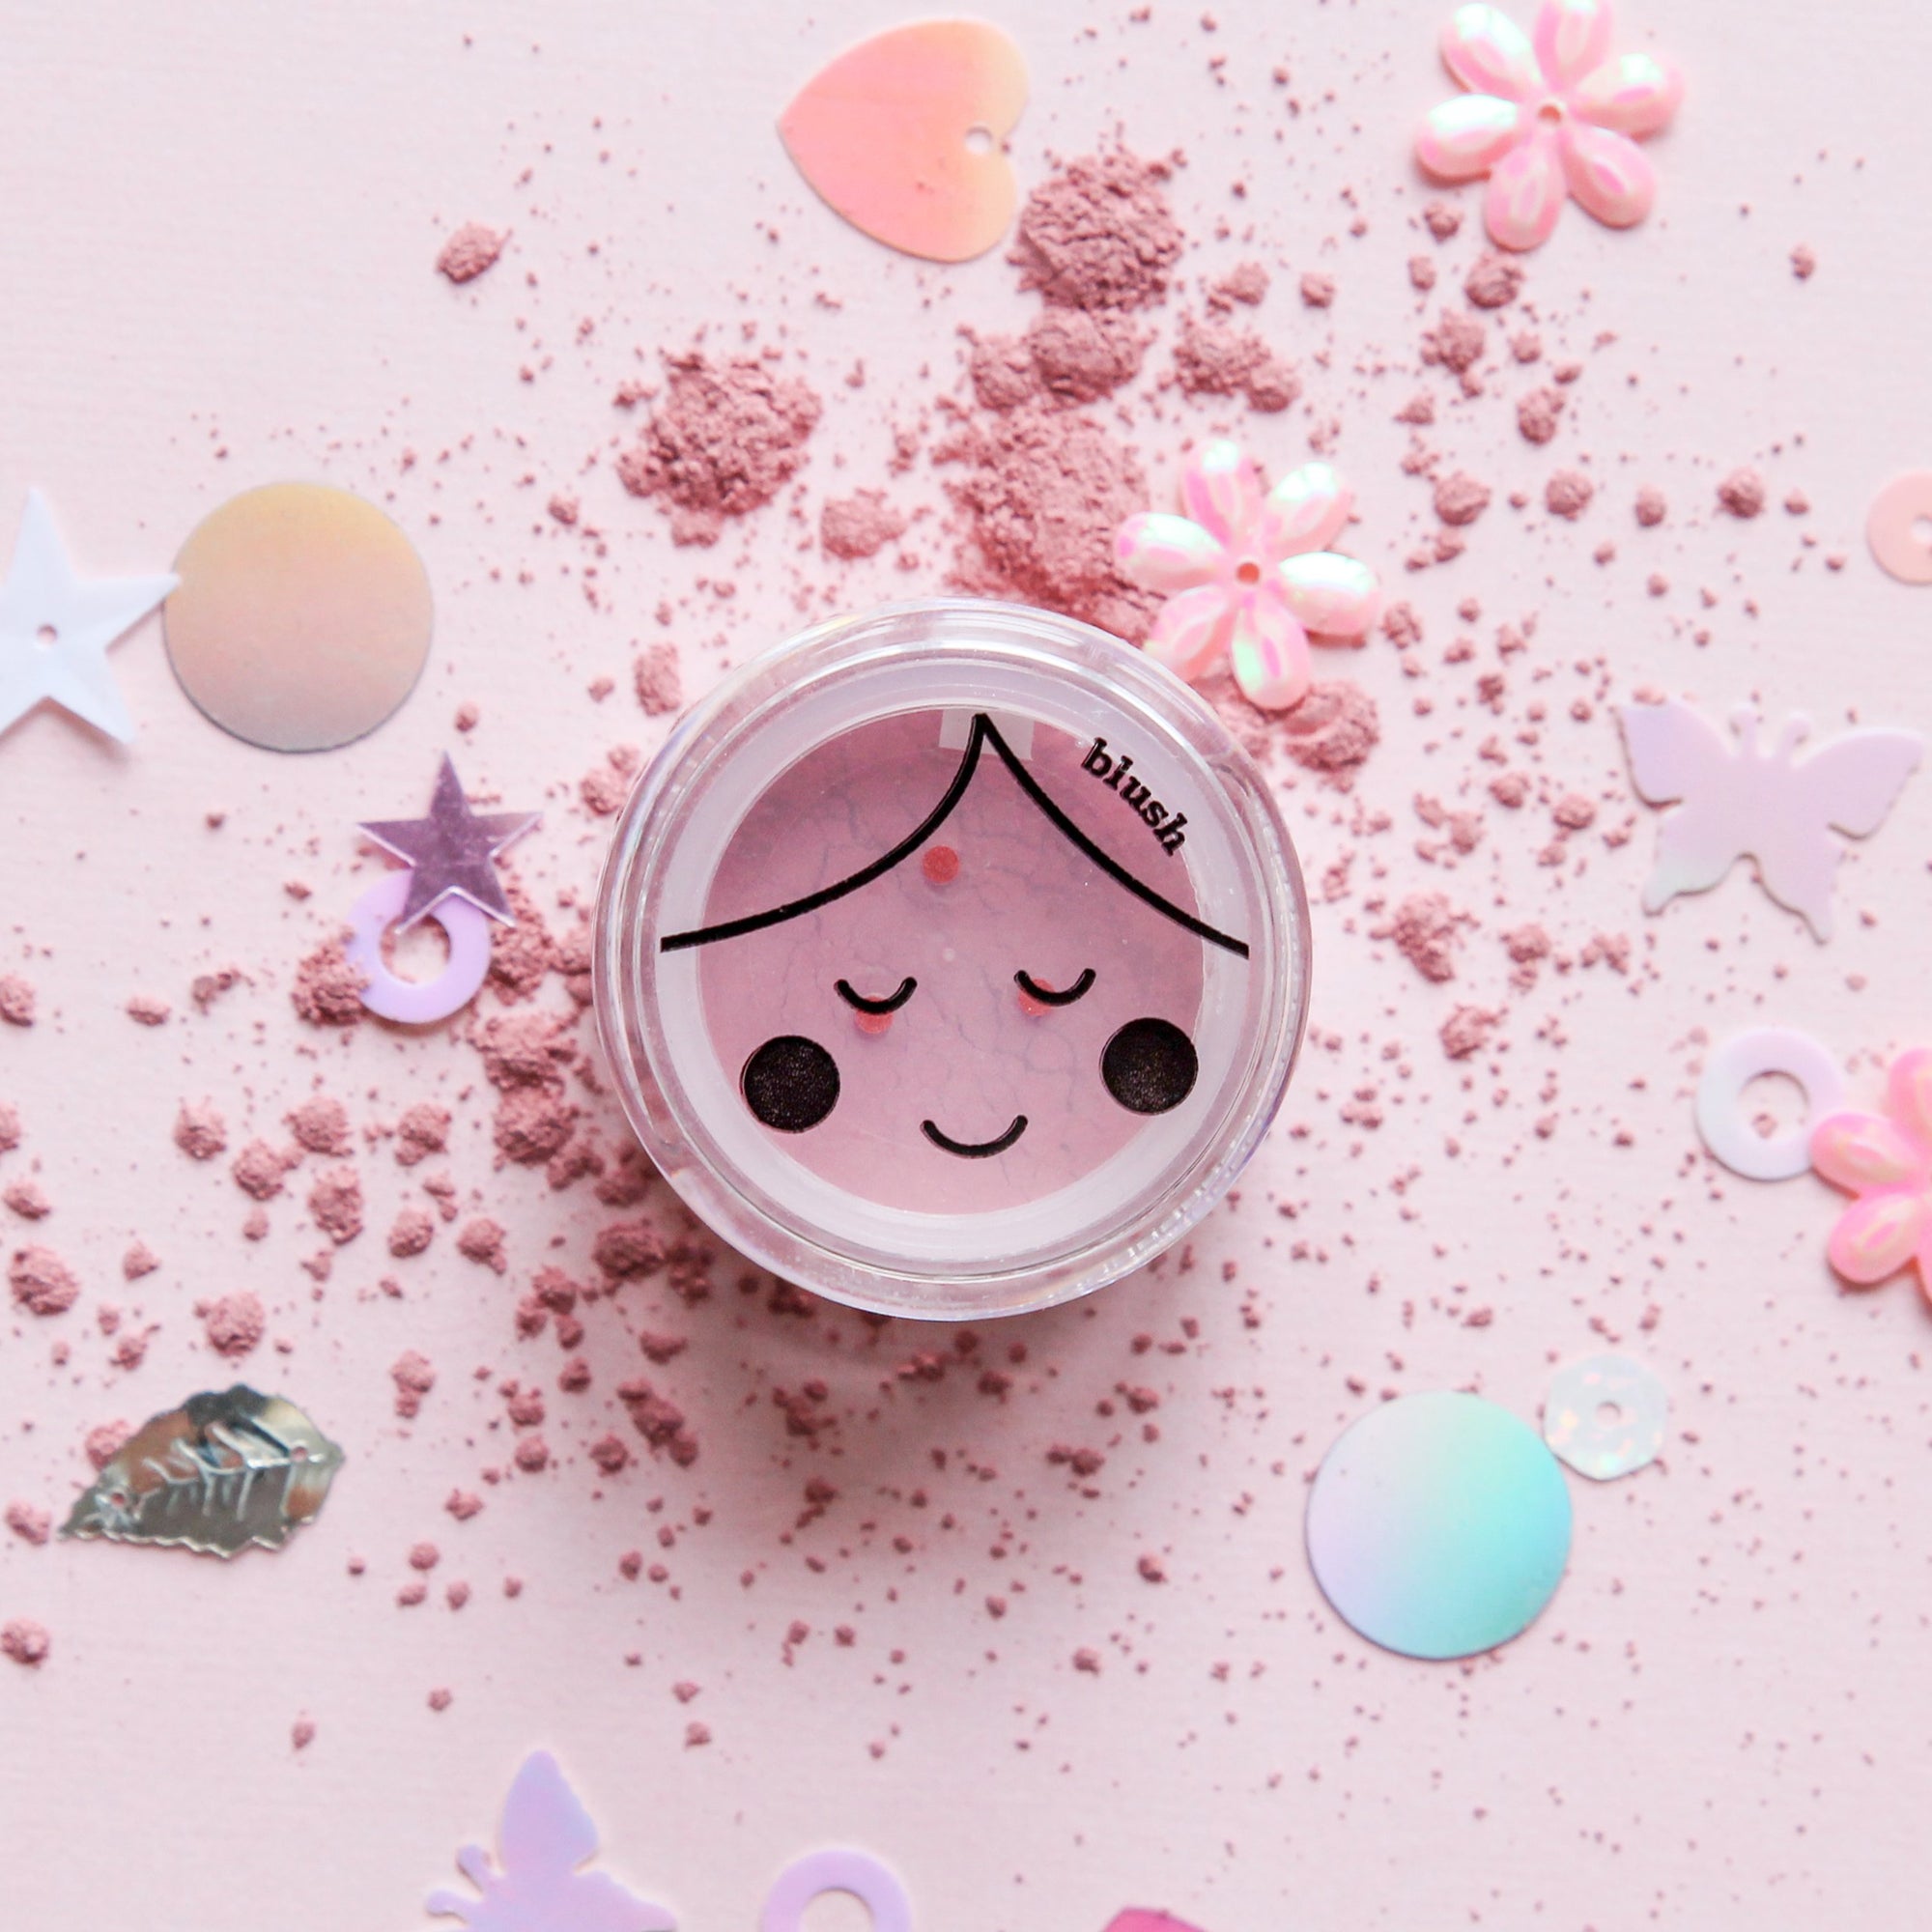 Natural dusty blush for kids who love makeup